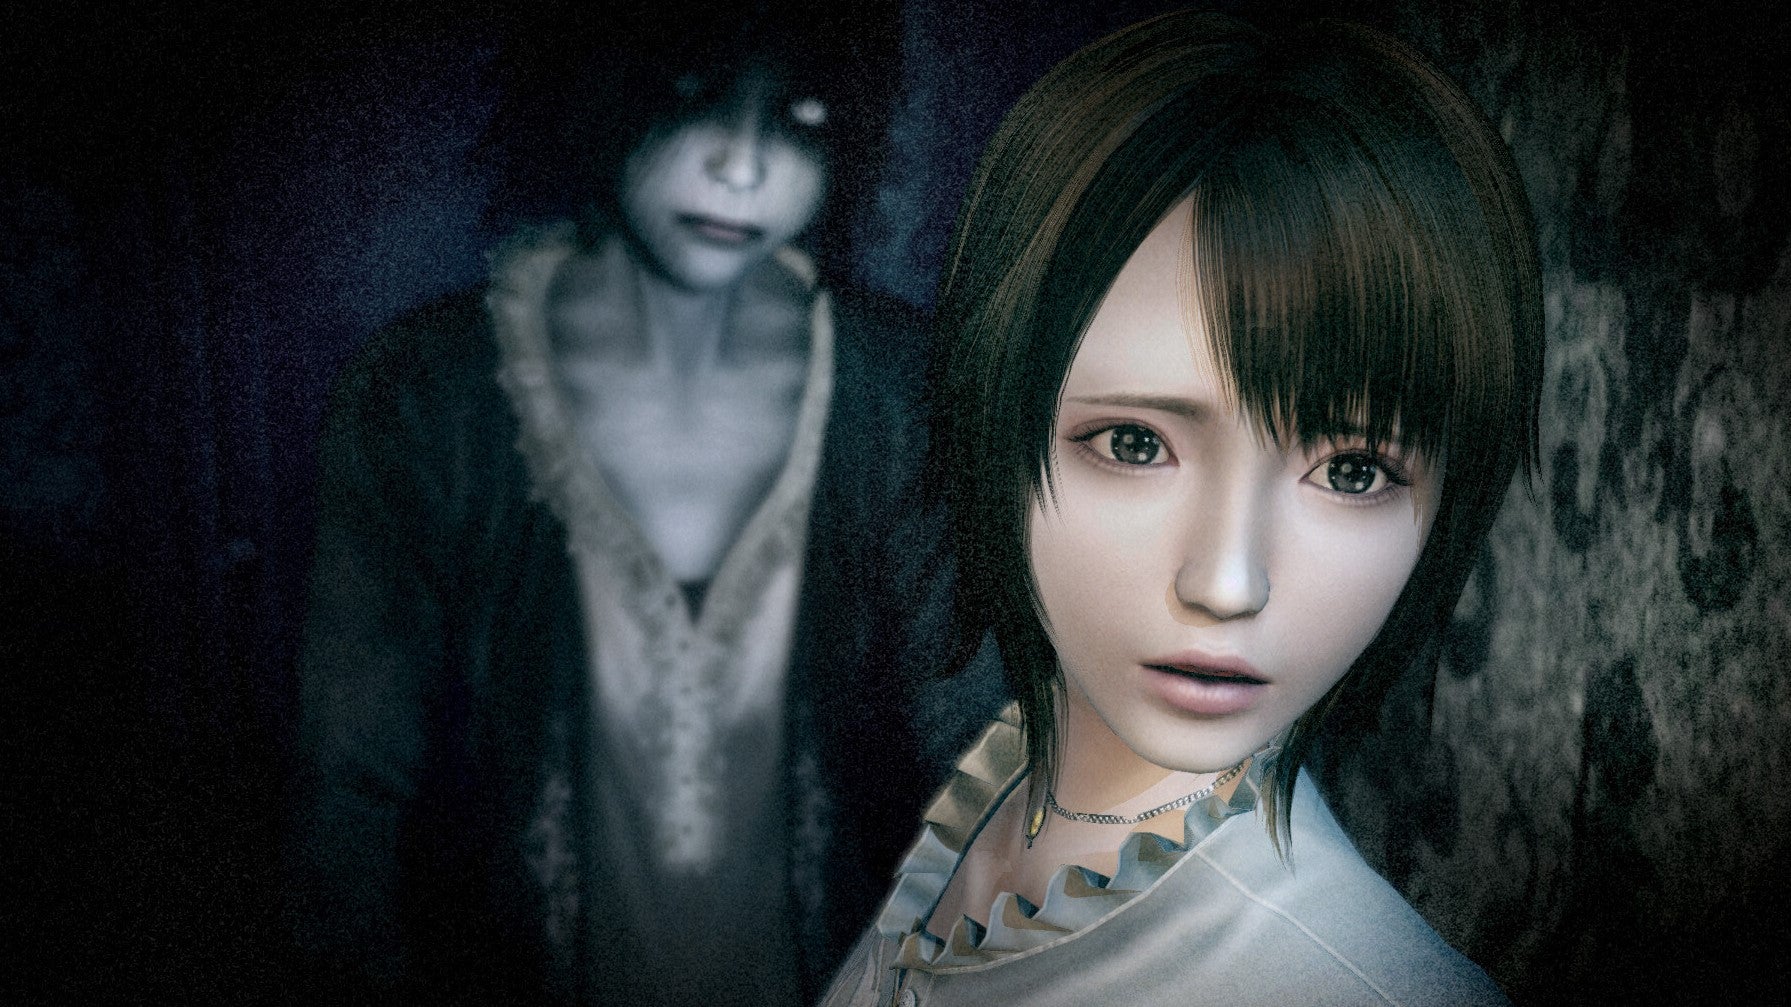 A spooky spectre stands behind an unsuspecting young woman in Fatal Frame: Mask of the Lunar Eclipse